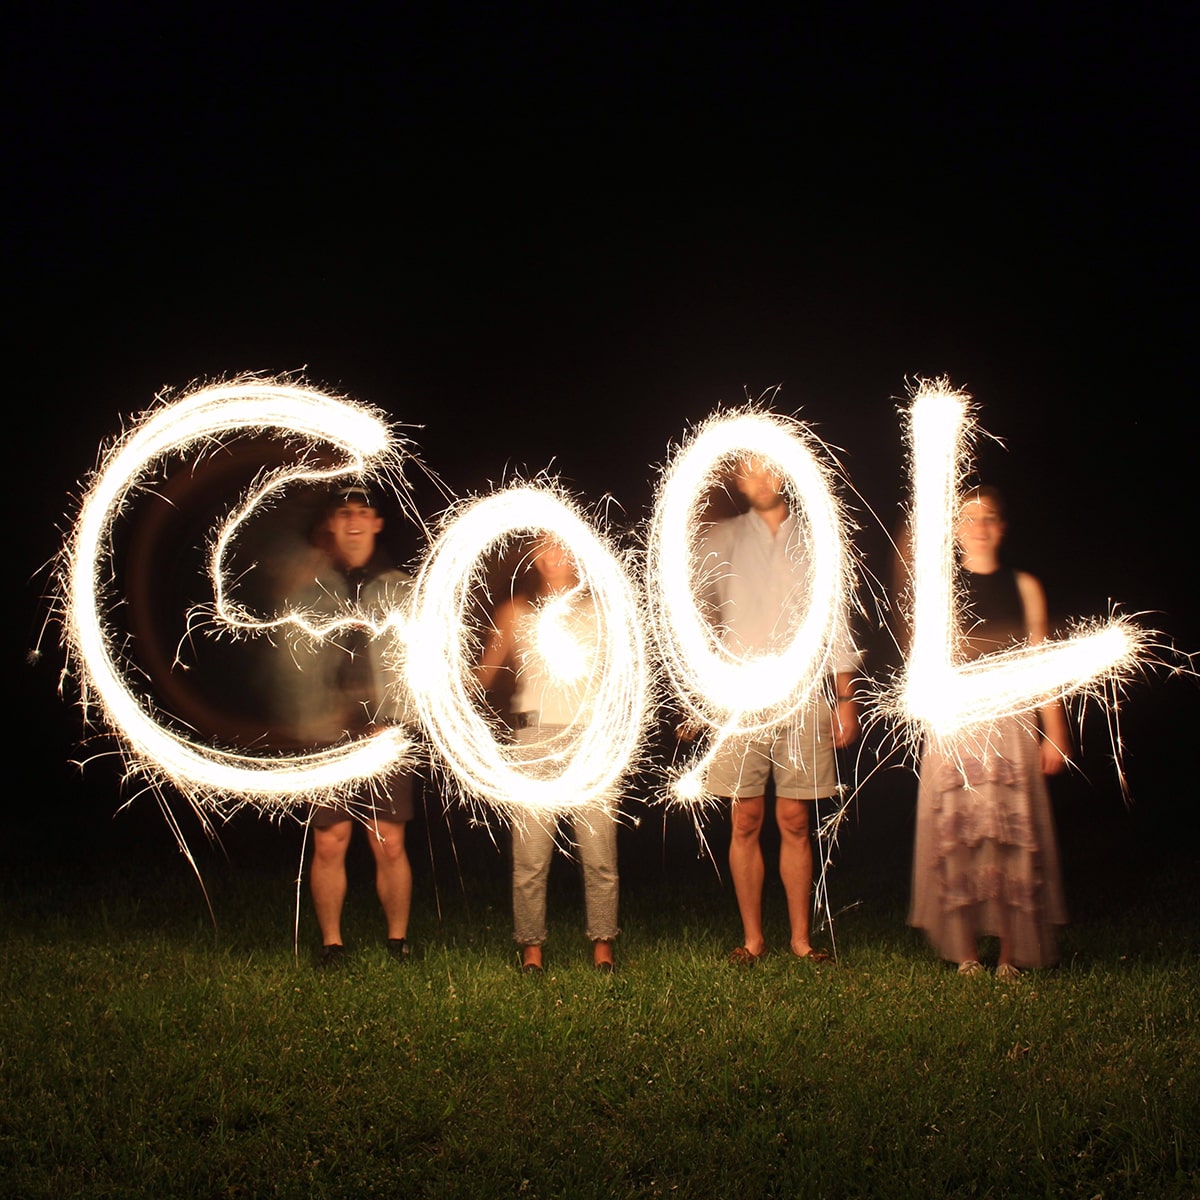 Spelling Out “COOL”

❤️ DM For More Information 🌼

Any questions? contact us today......
📲 (763) 786-4278
📧 sales@weddingdaysparklers.com
🌐 weddingdaysparklers.com/inspiration/in…
.
.
.
#weddinginspiration #weddingplanner #weddingideas #weddingphoto #weddingdecor #weddingparty